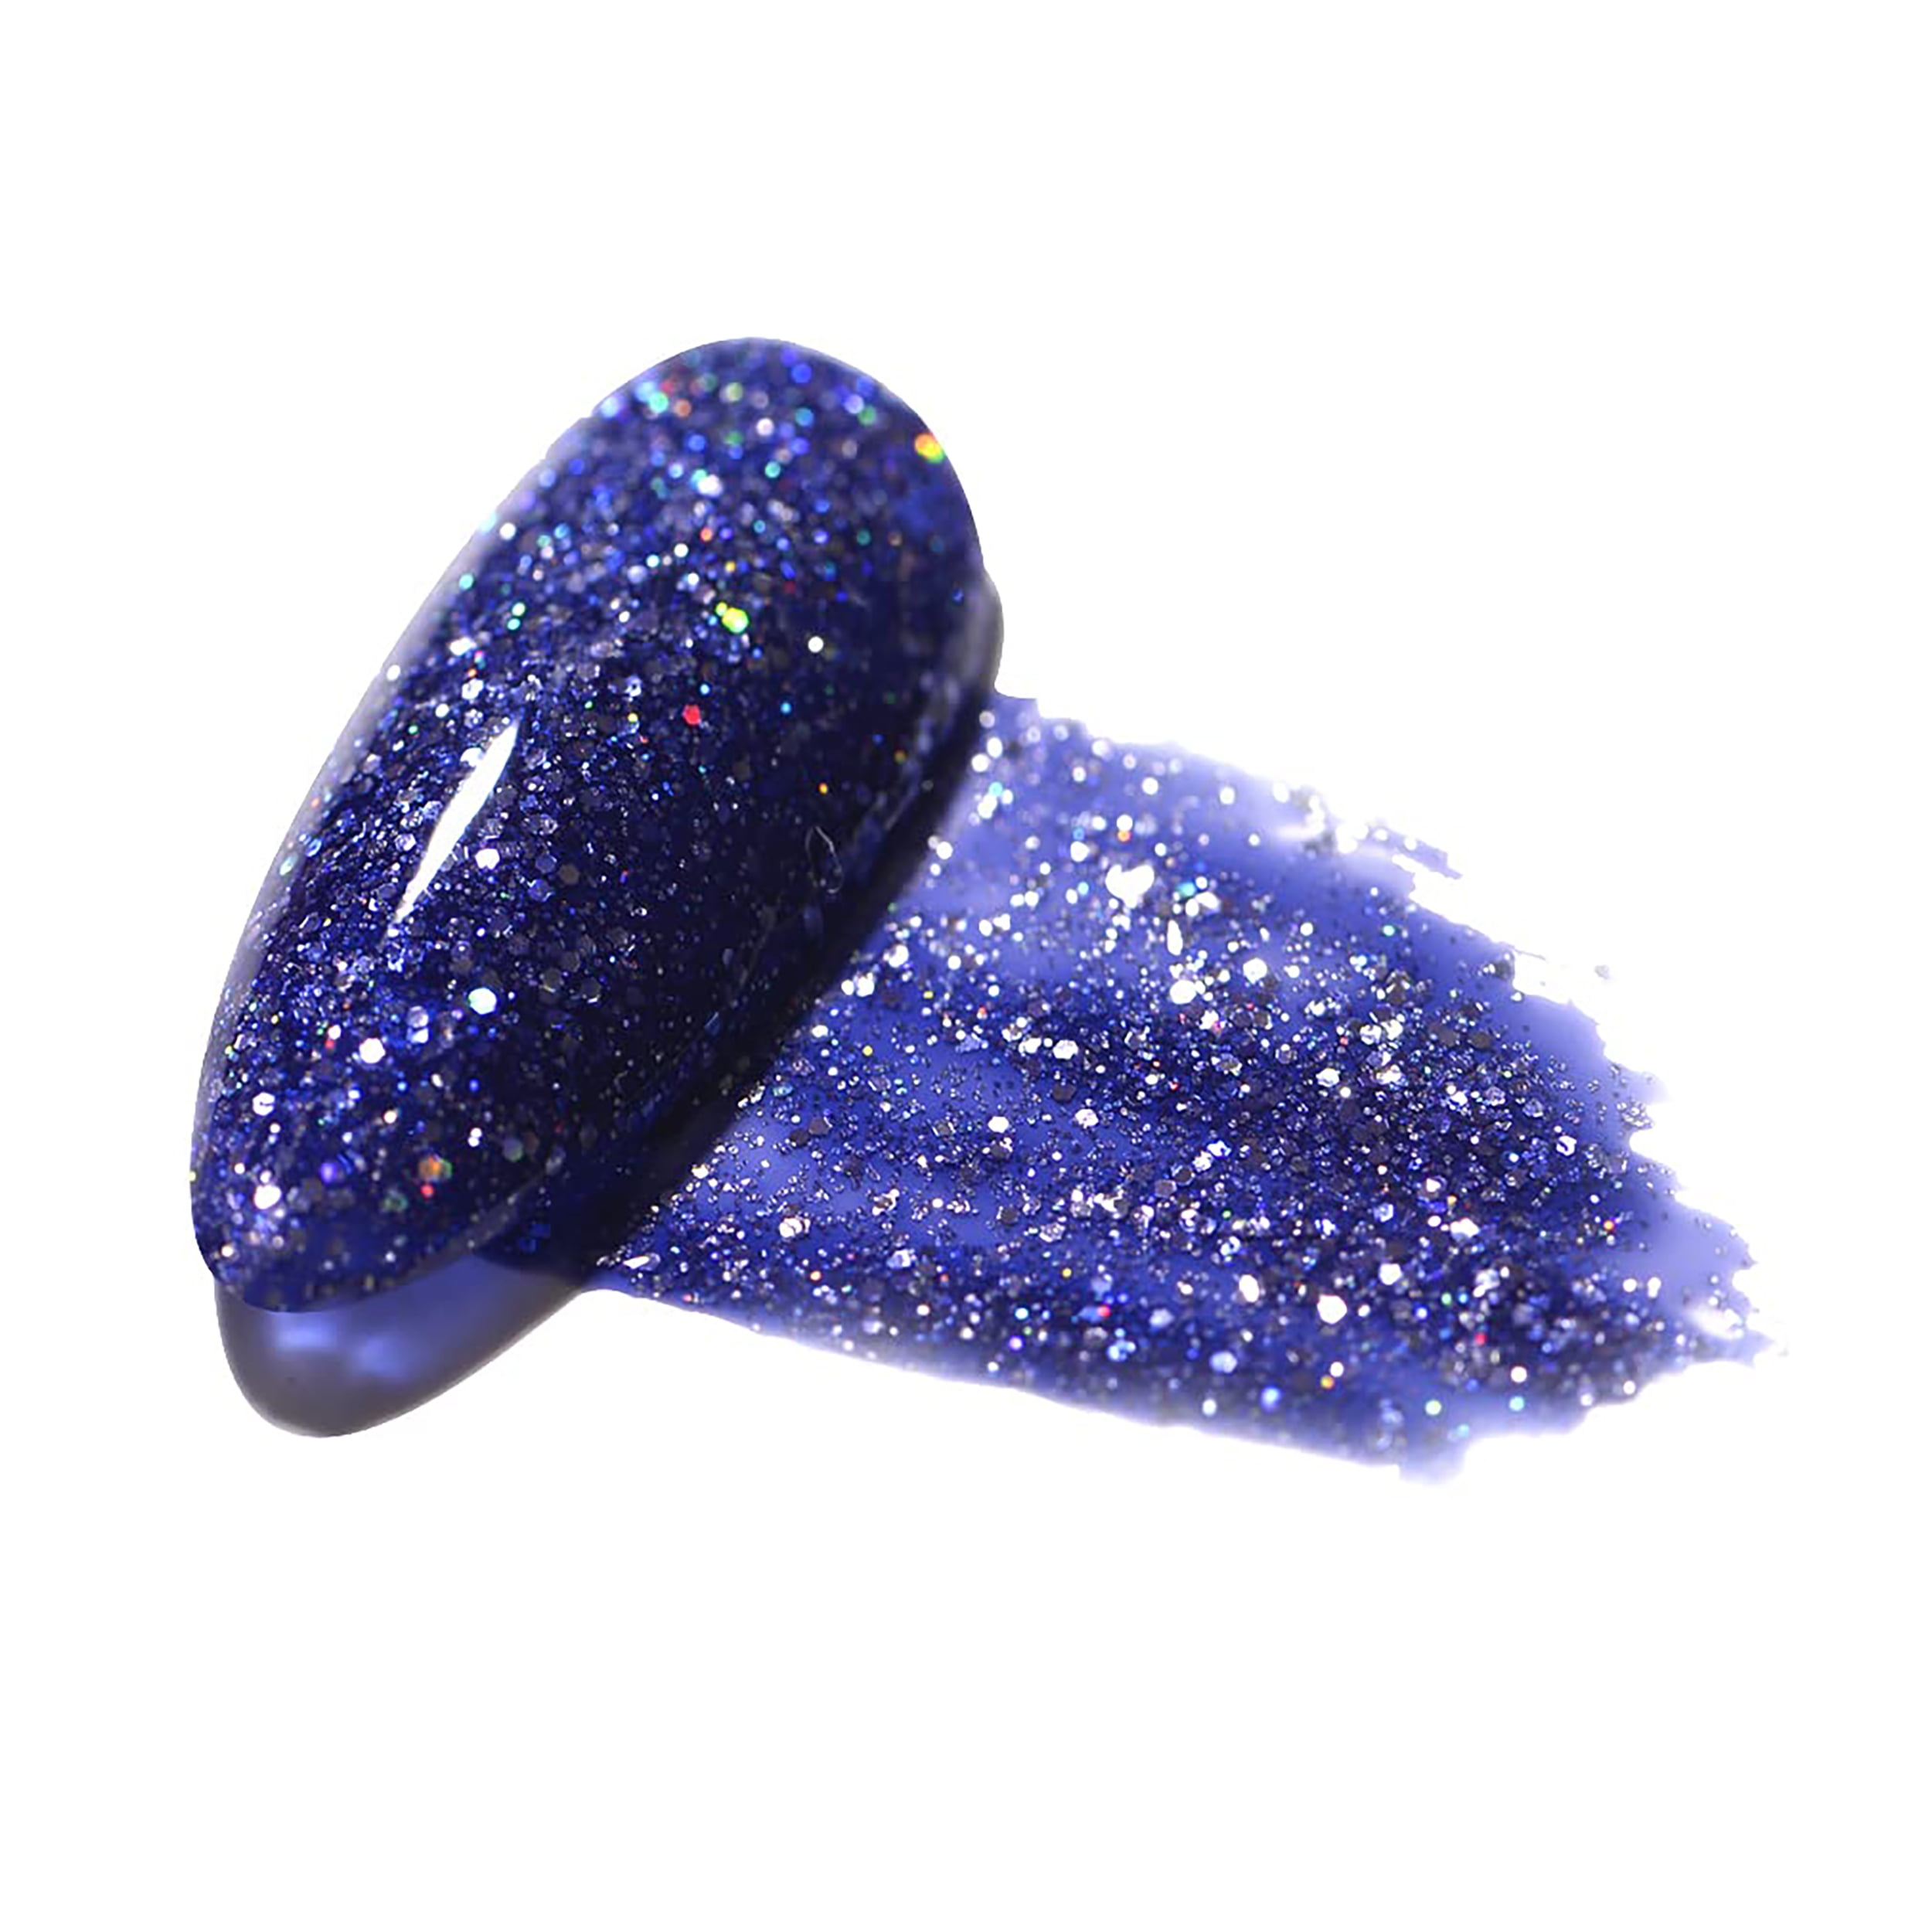 Check Out Ginger Polish's Blue Holographic Nail Polish At ILMP